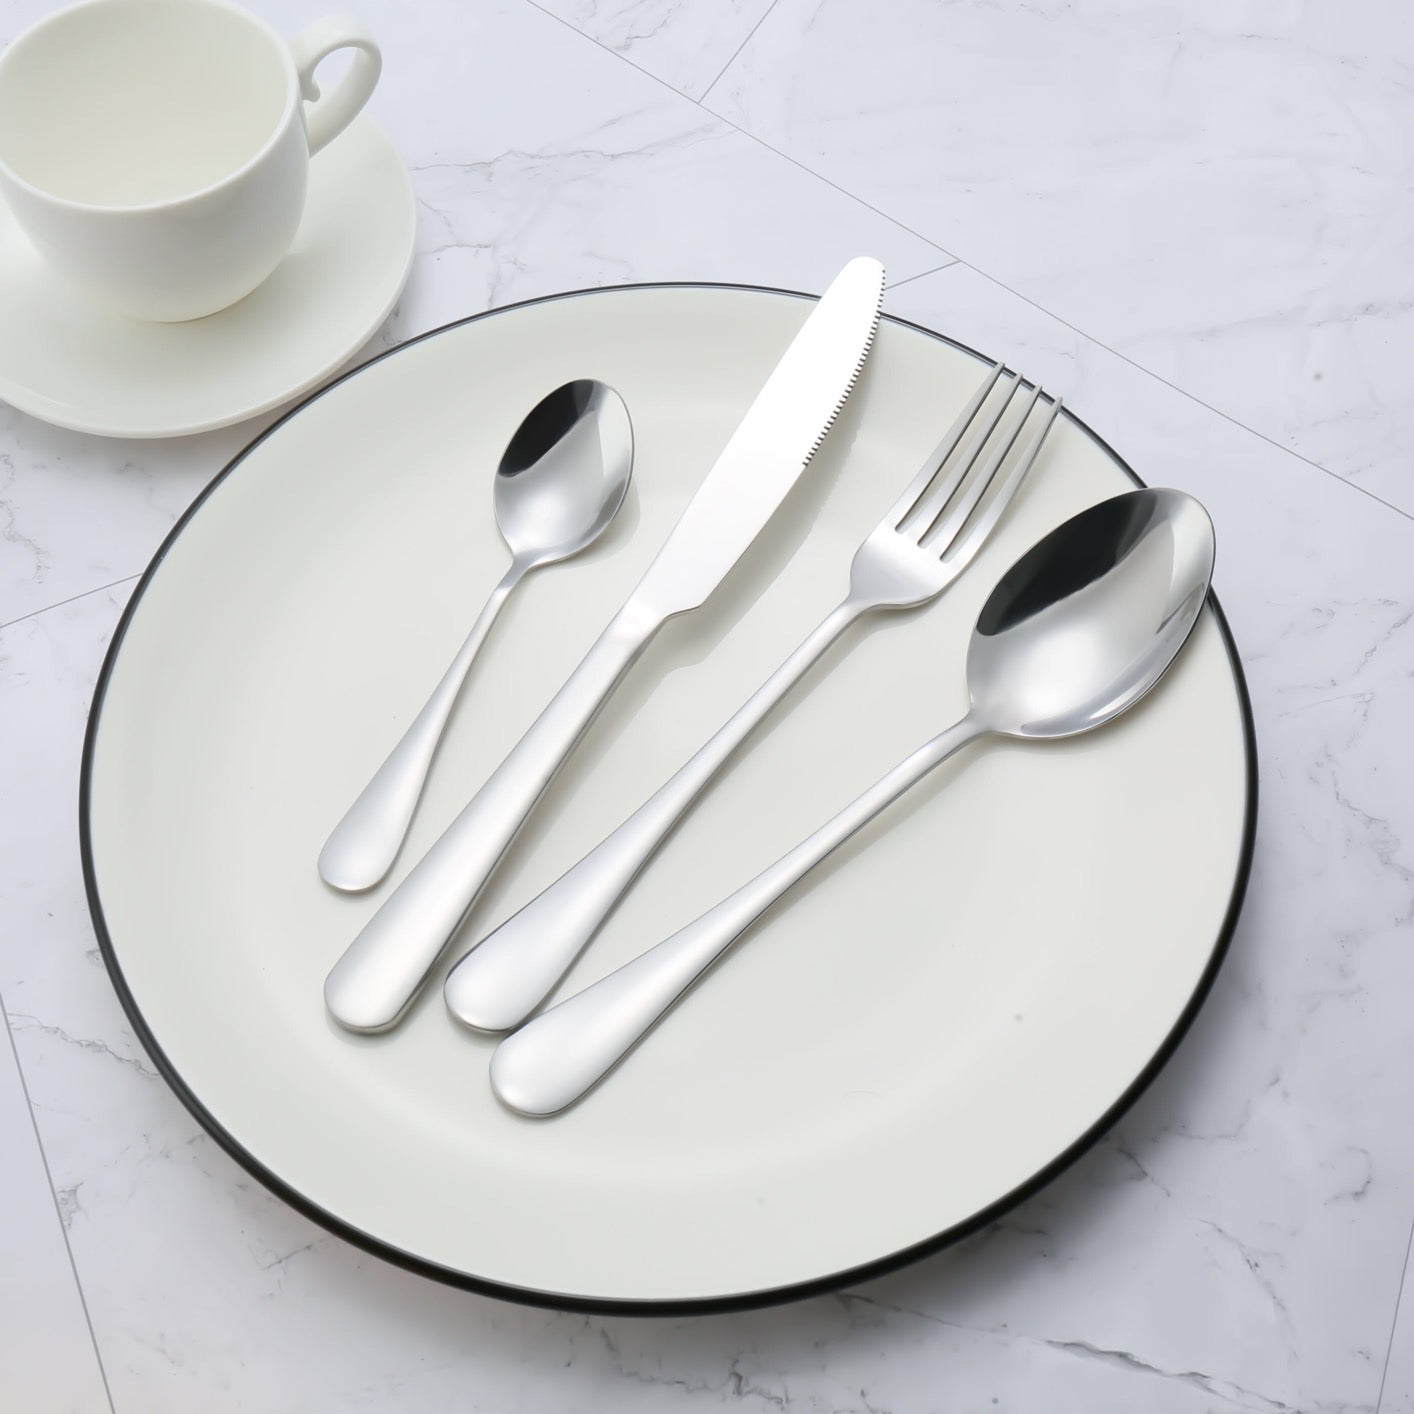 LMA Authentic 24 Piece Stainless steel Cutlery Dinner Set -Silver